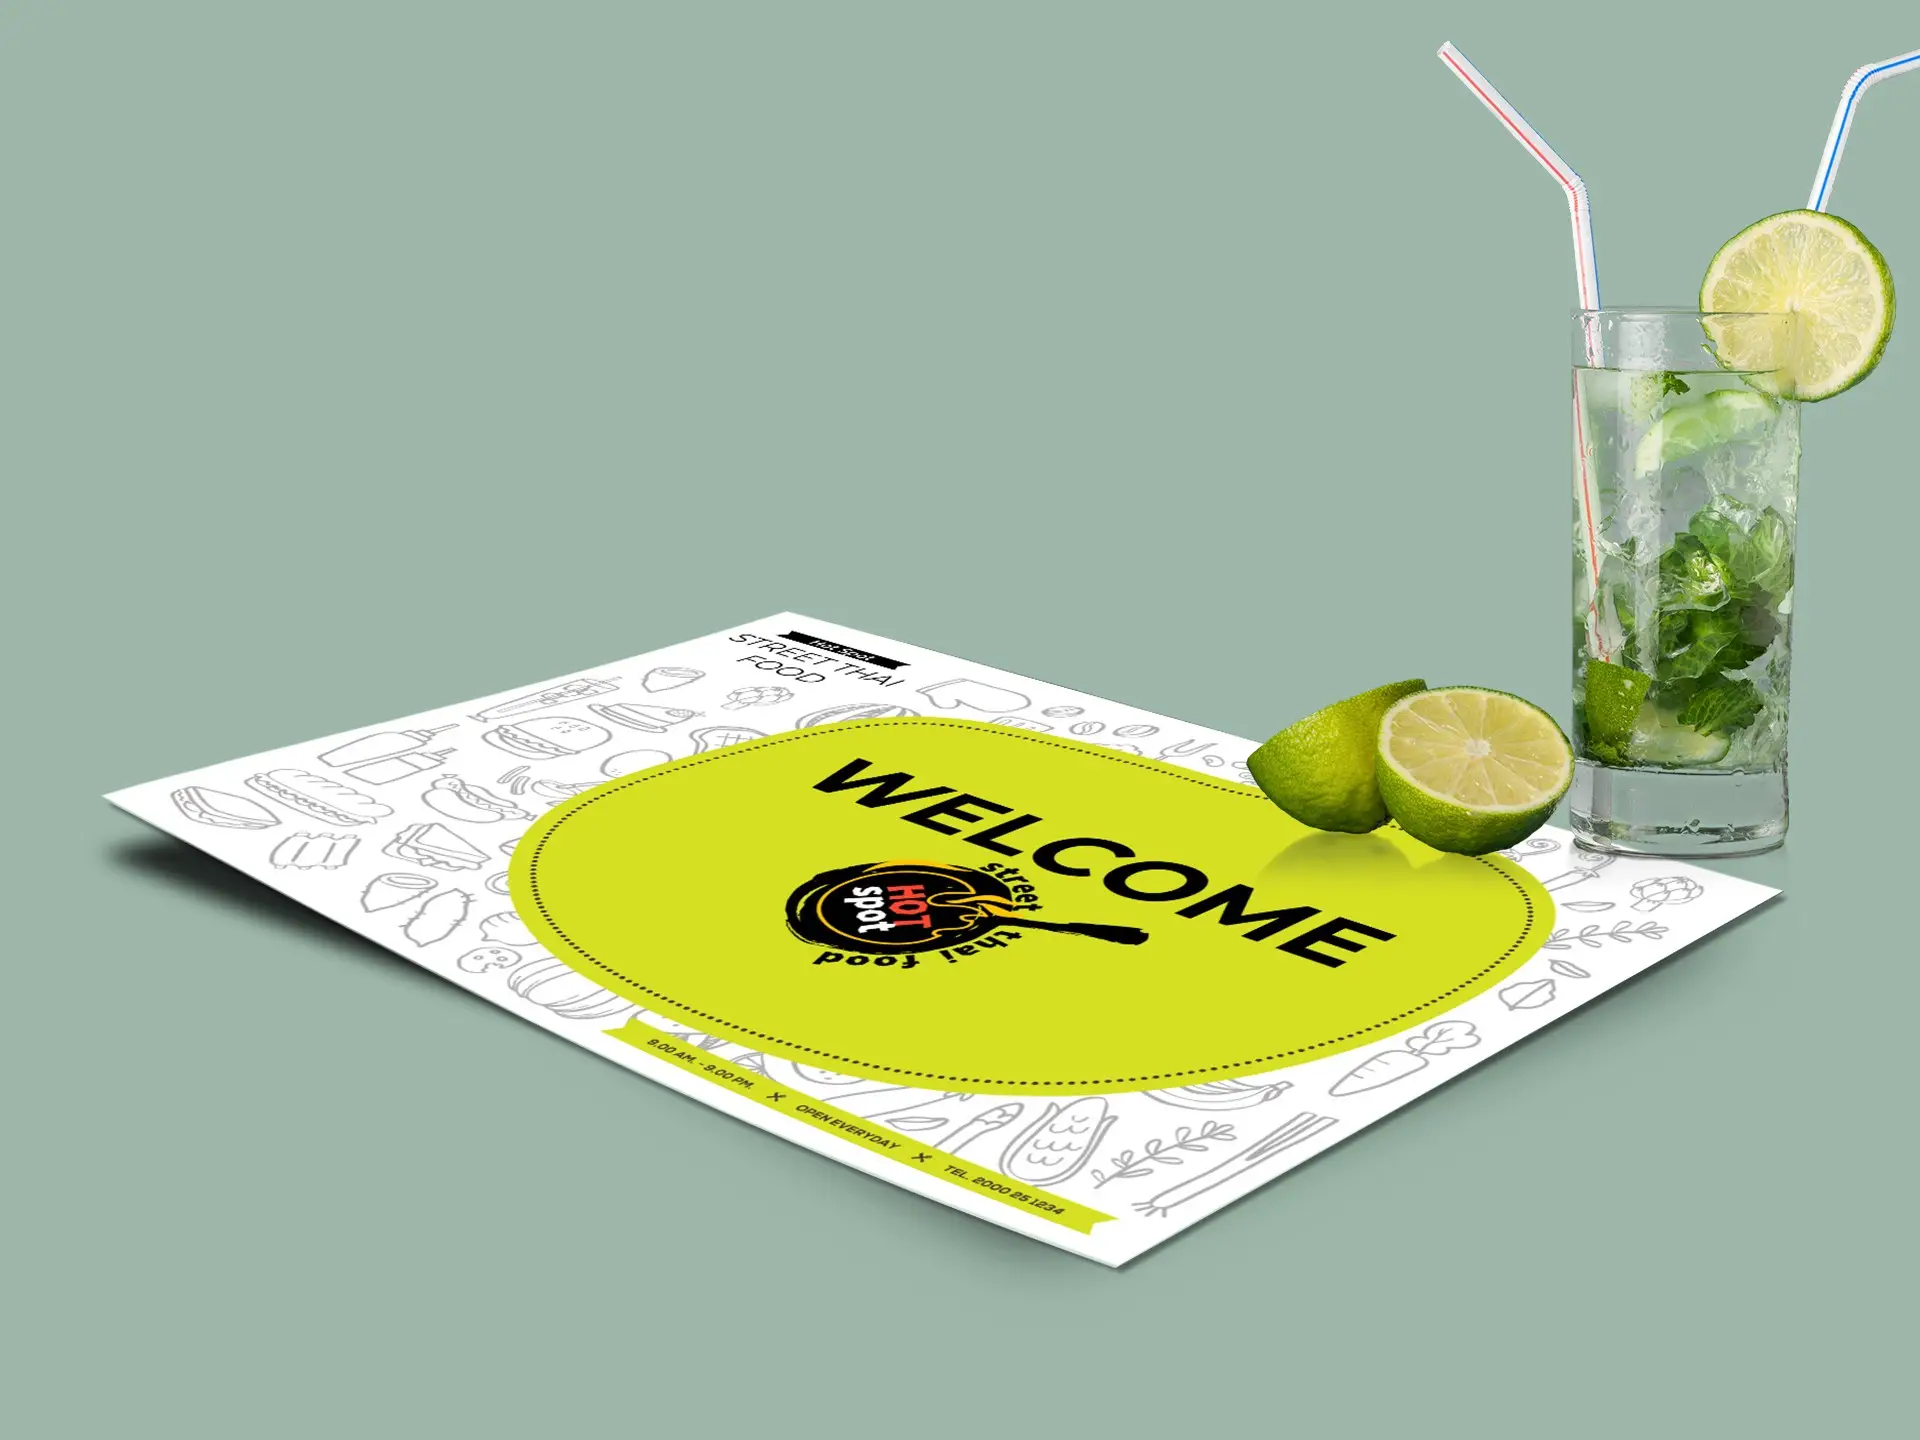 Customized Placemats